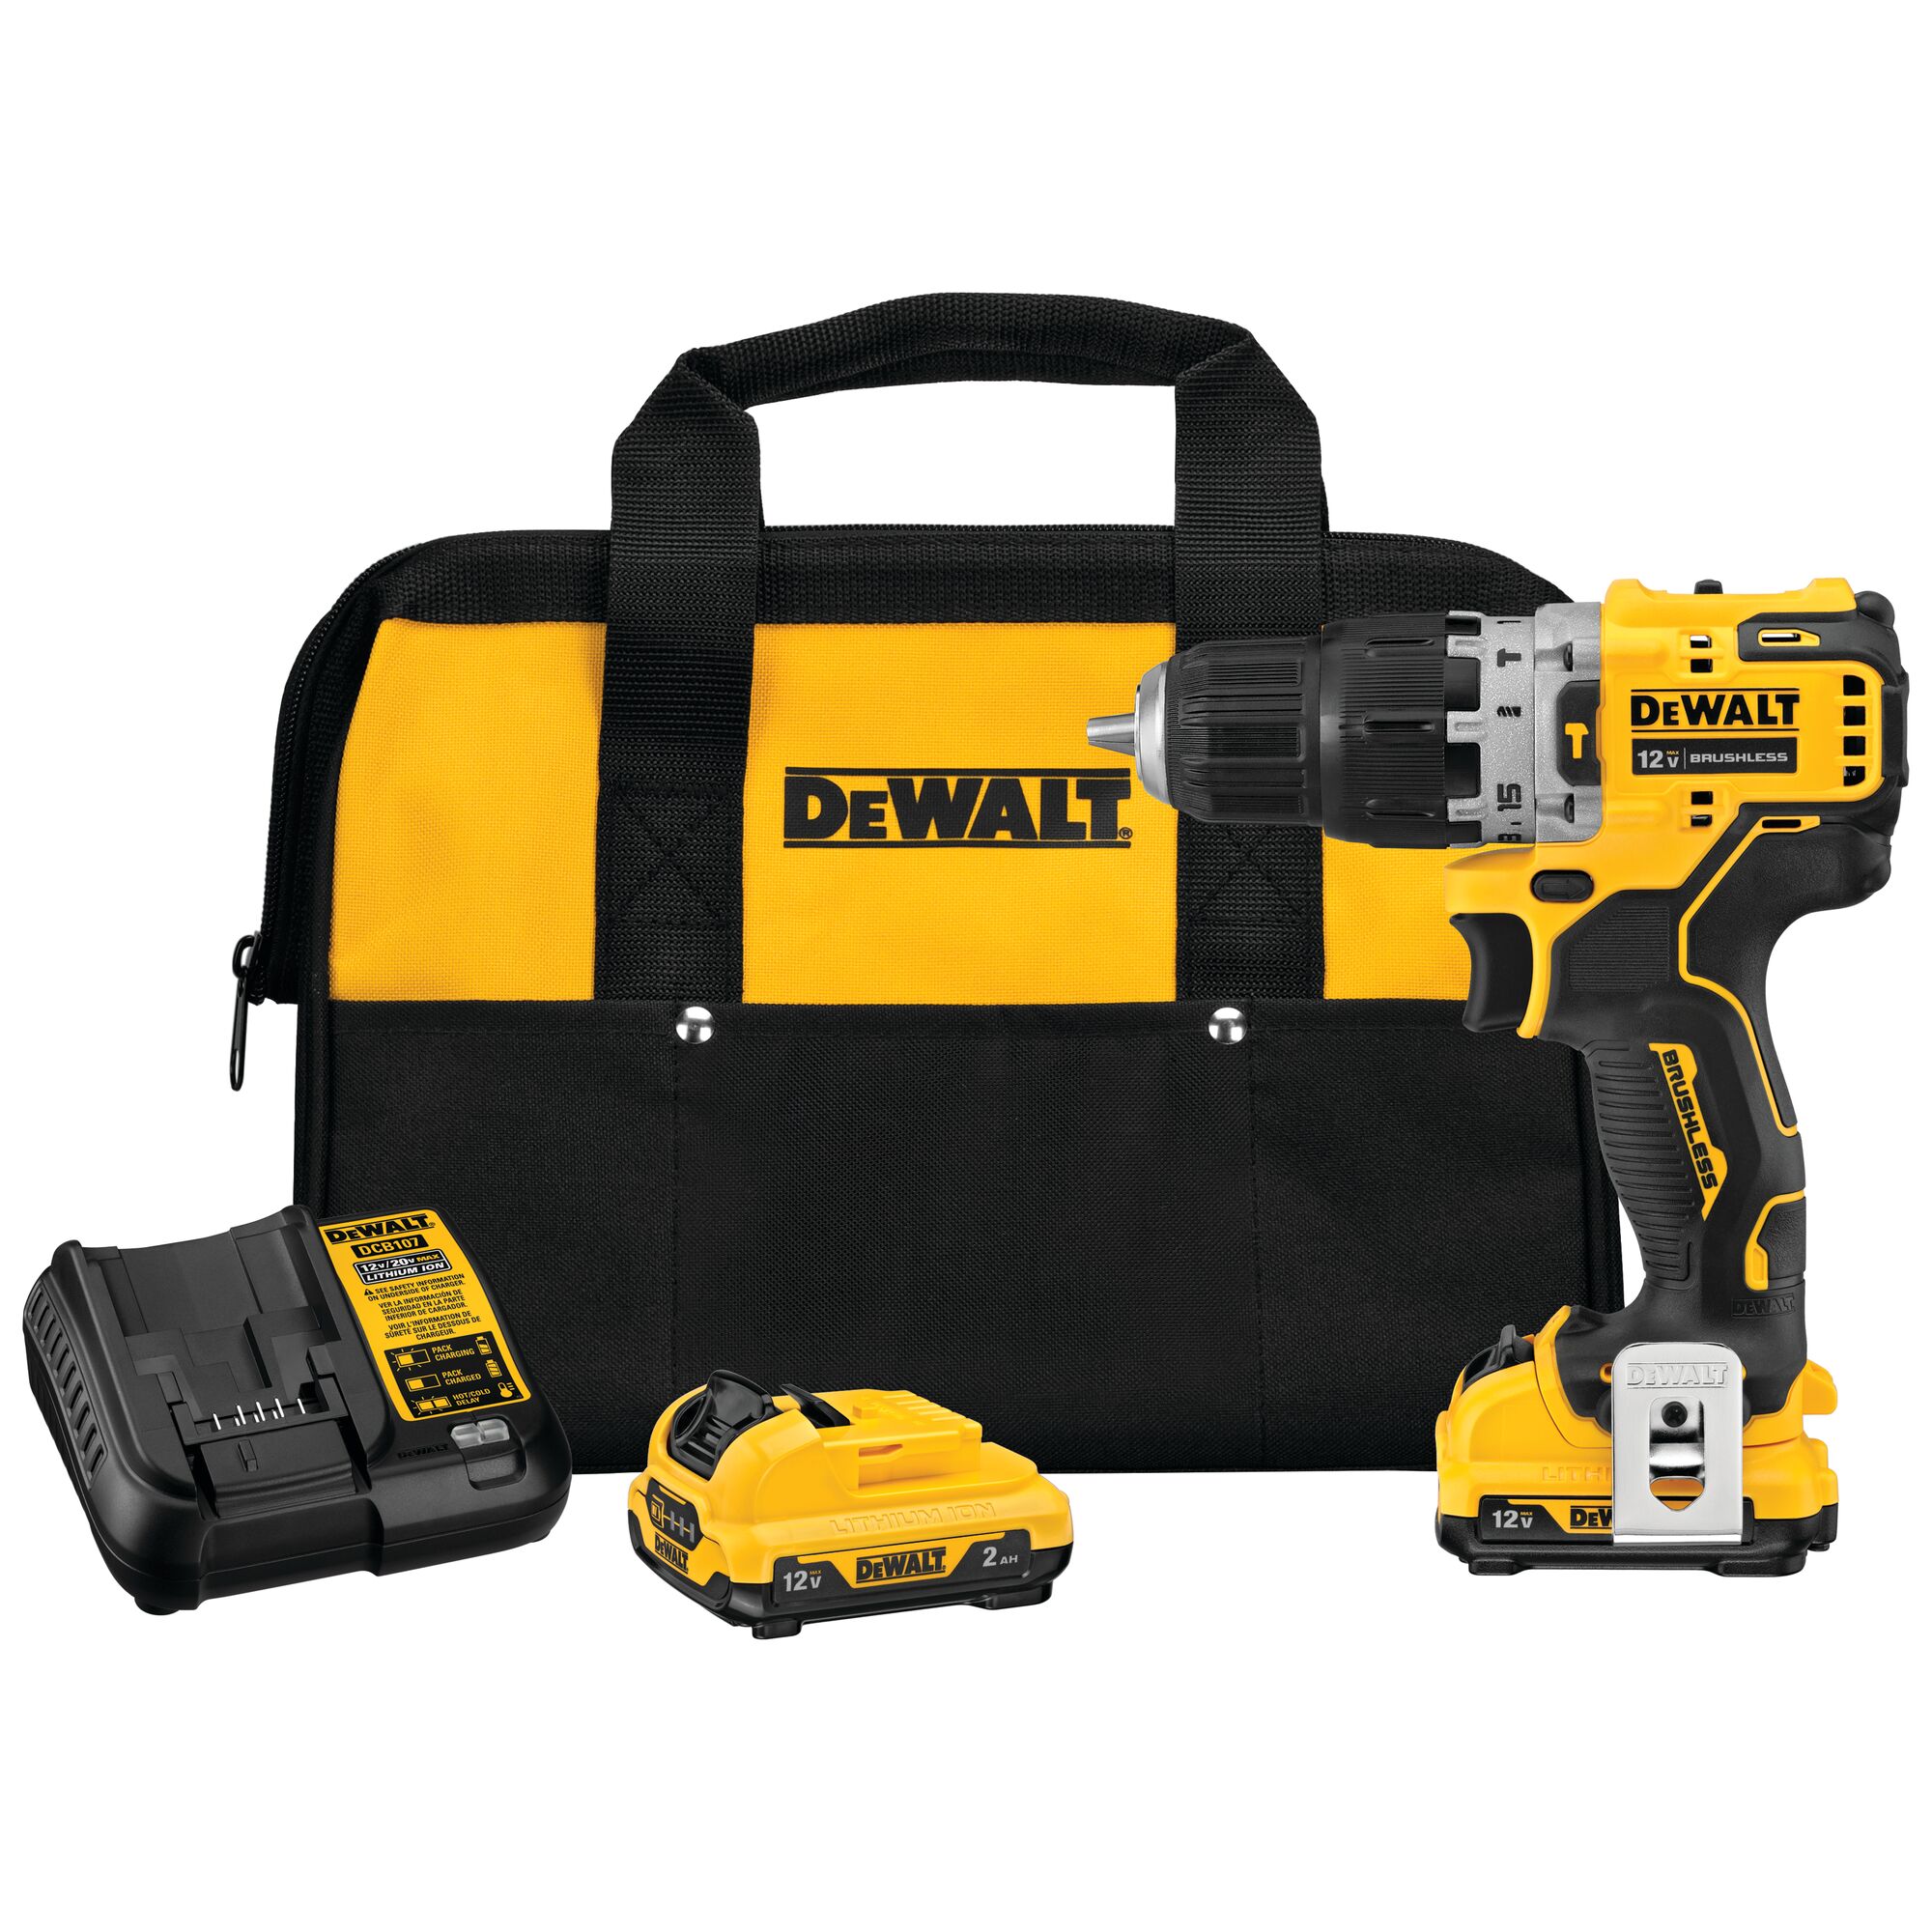 XTREME™ MAX* Brushless Cordless 3/8 in. Hammer Drill Kit